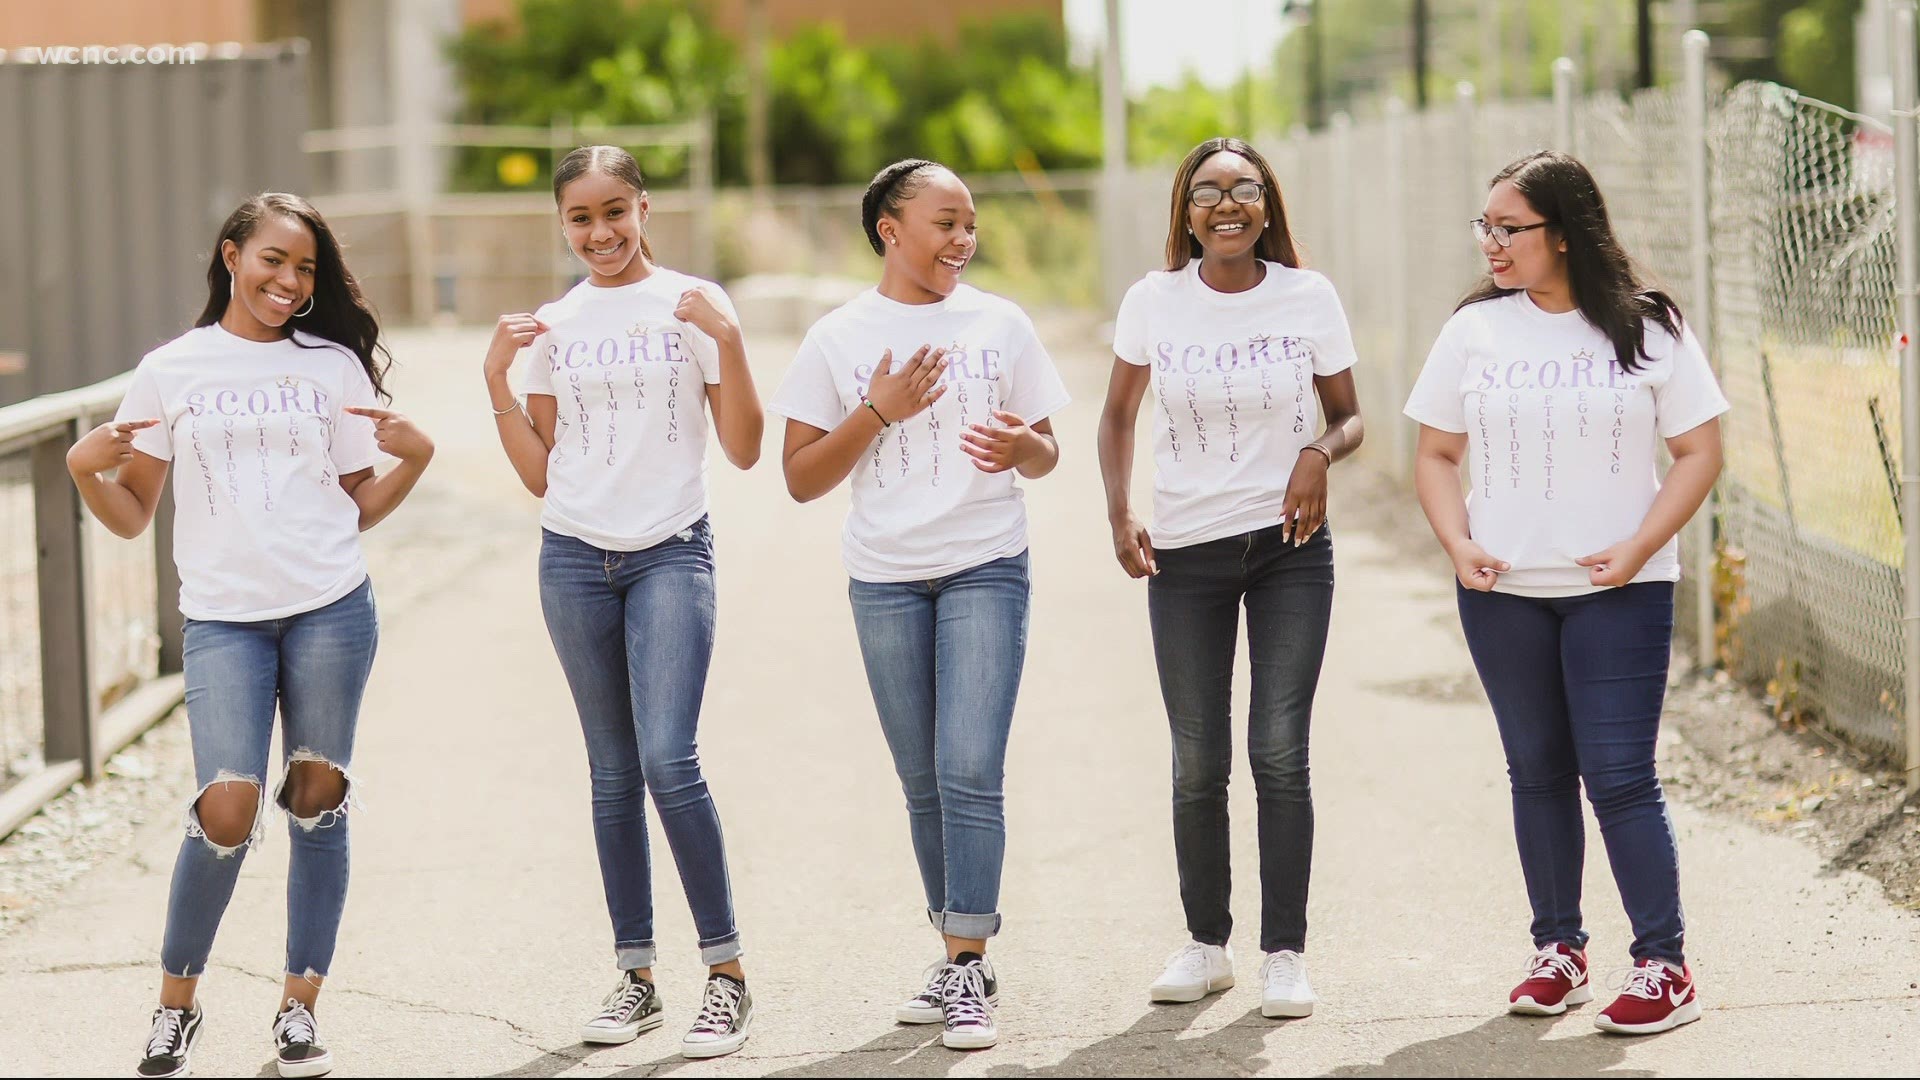 Encouraging girls to pursue whatever they put their minds to by giving them hands-on opportunities. It’s the message behind Smile Savvy's nonprofit SCORE Inc.